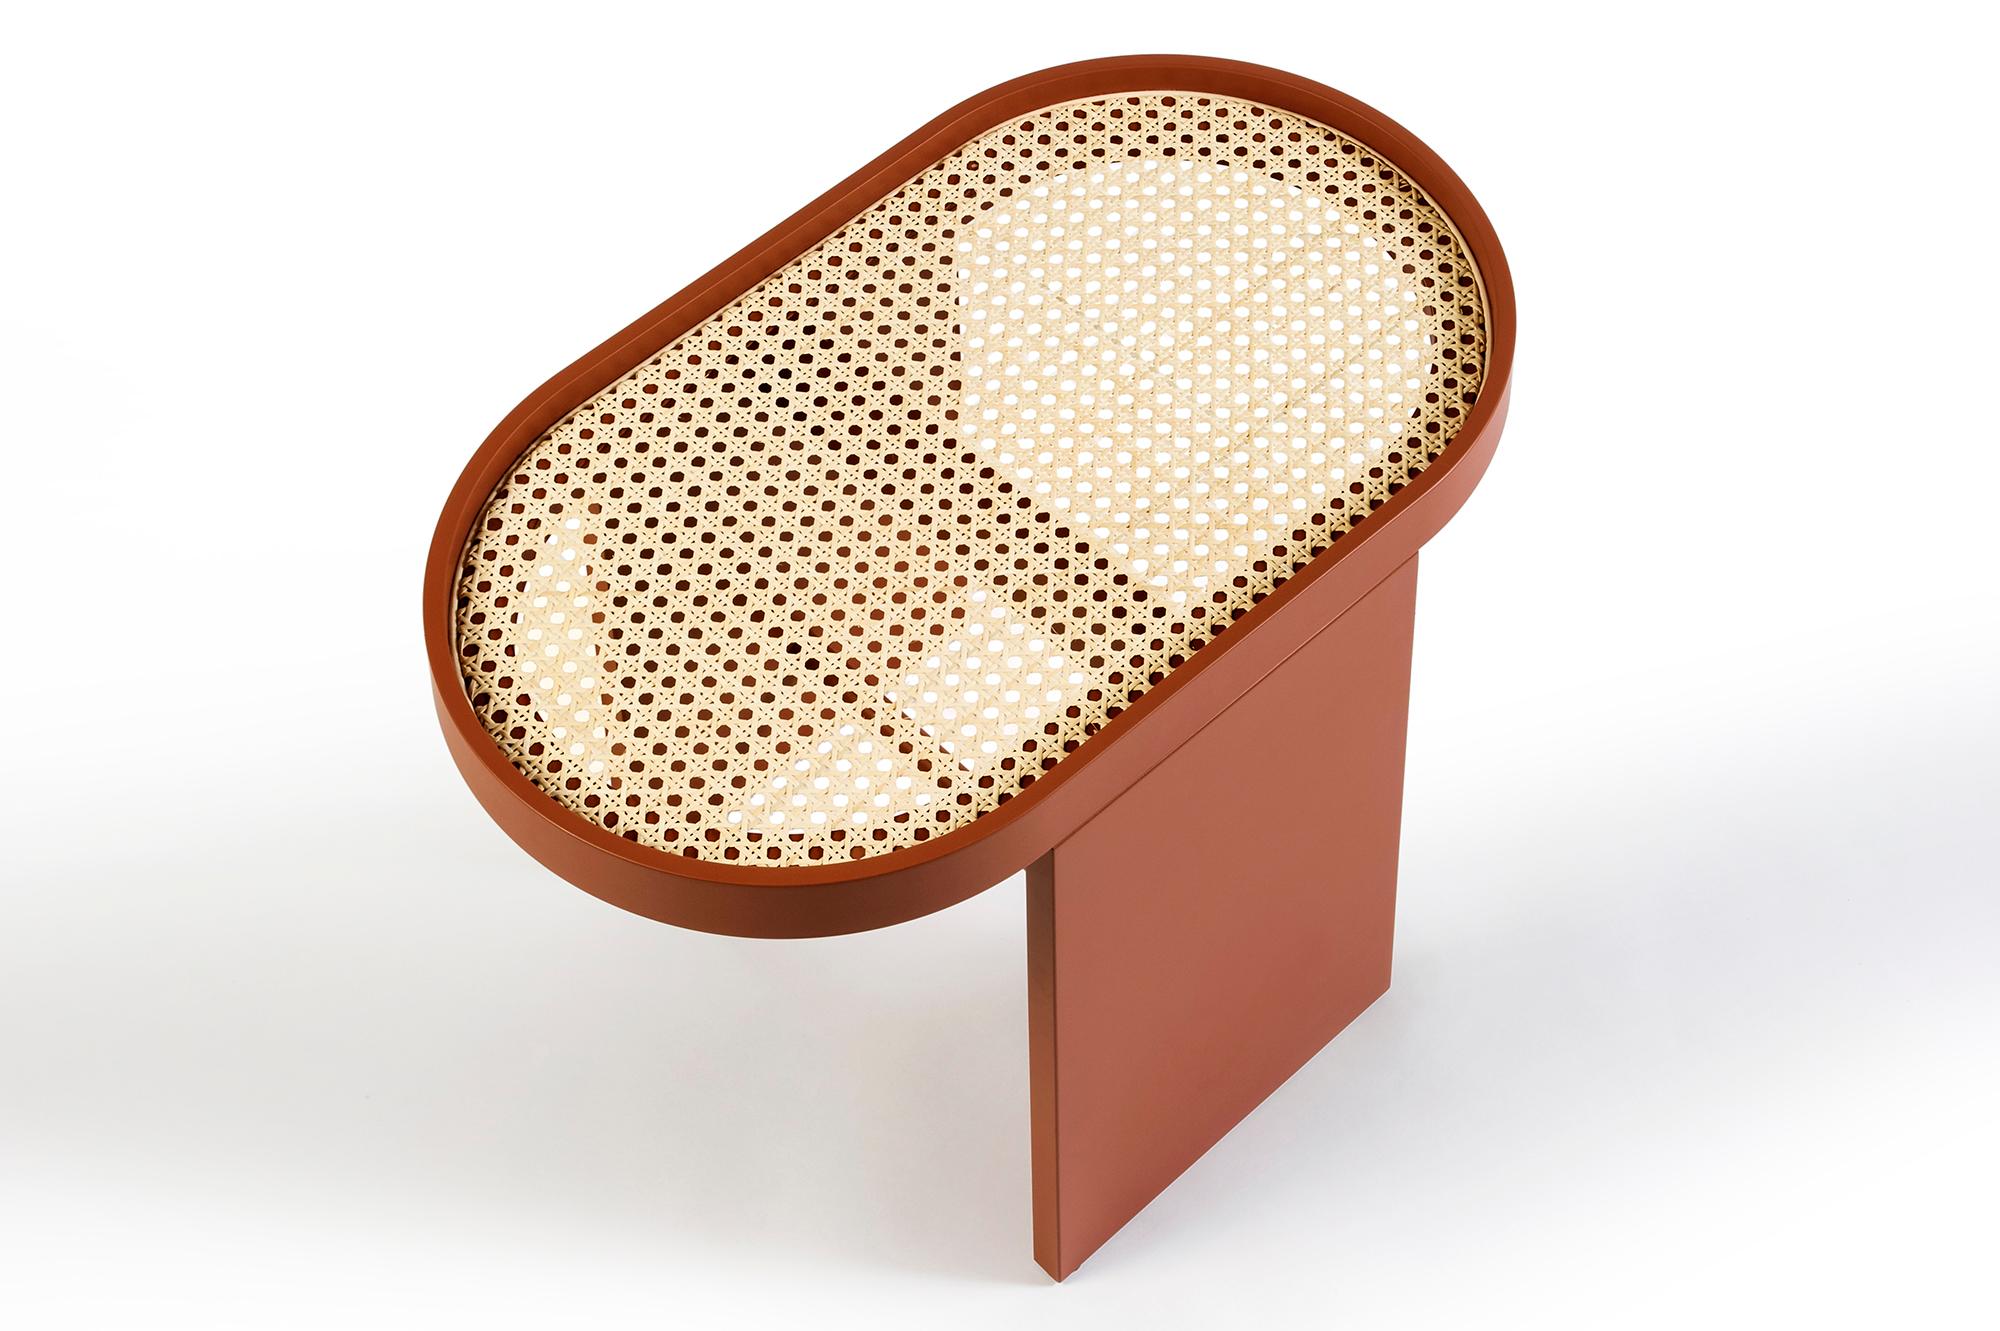 A collection of little furniture where cane is interpreted in an innovate way.